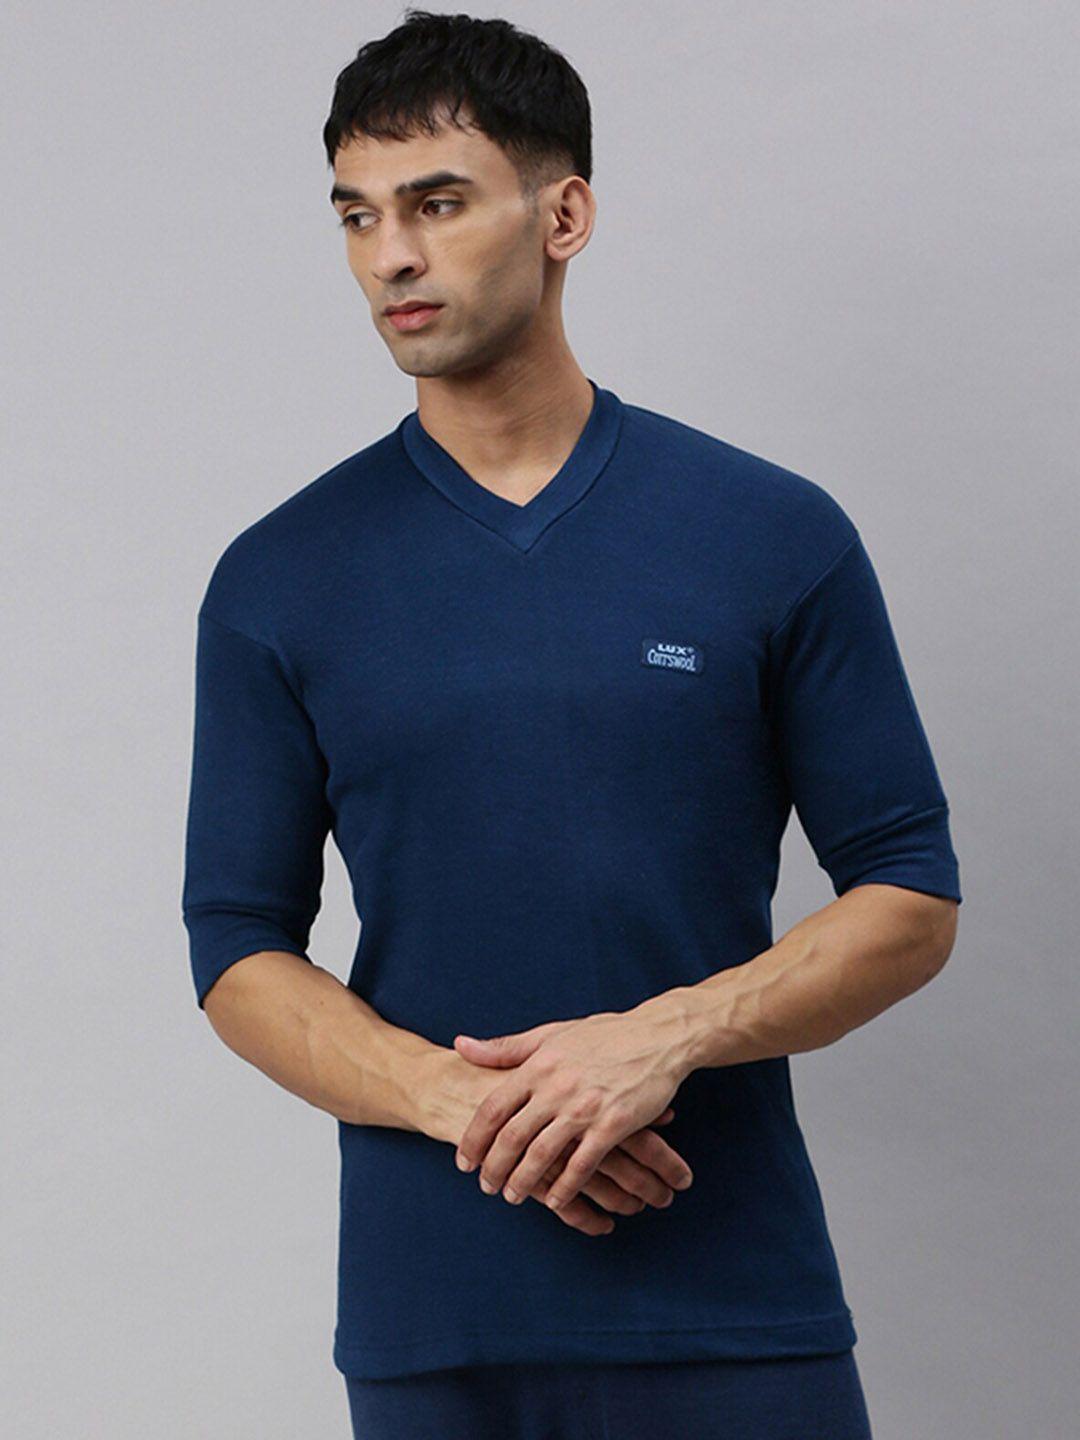 lux cottswool v-neck short sleeves thermal top